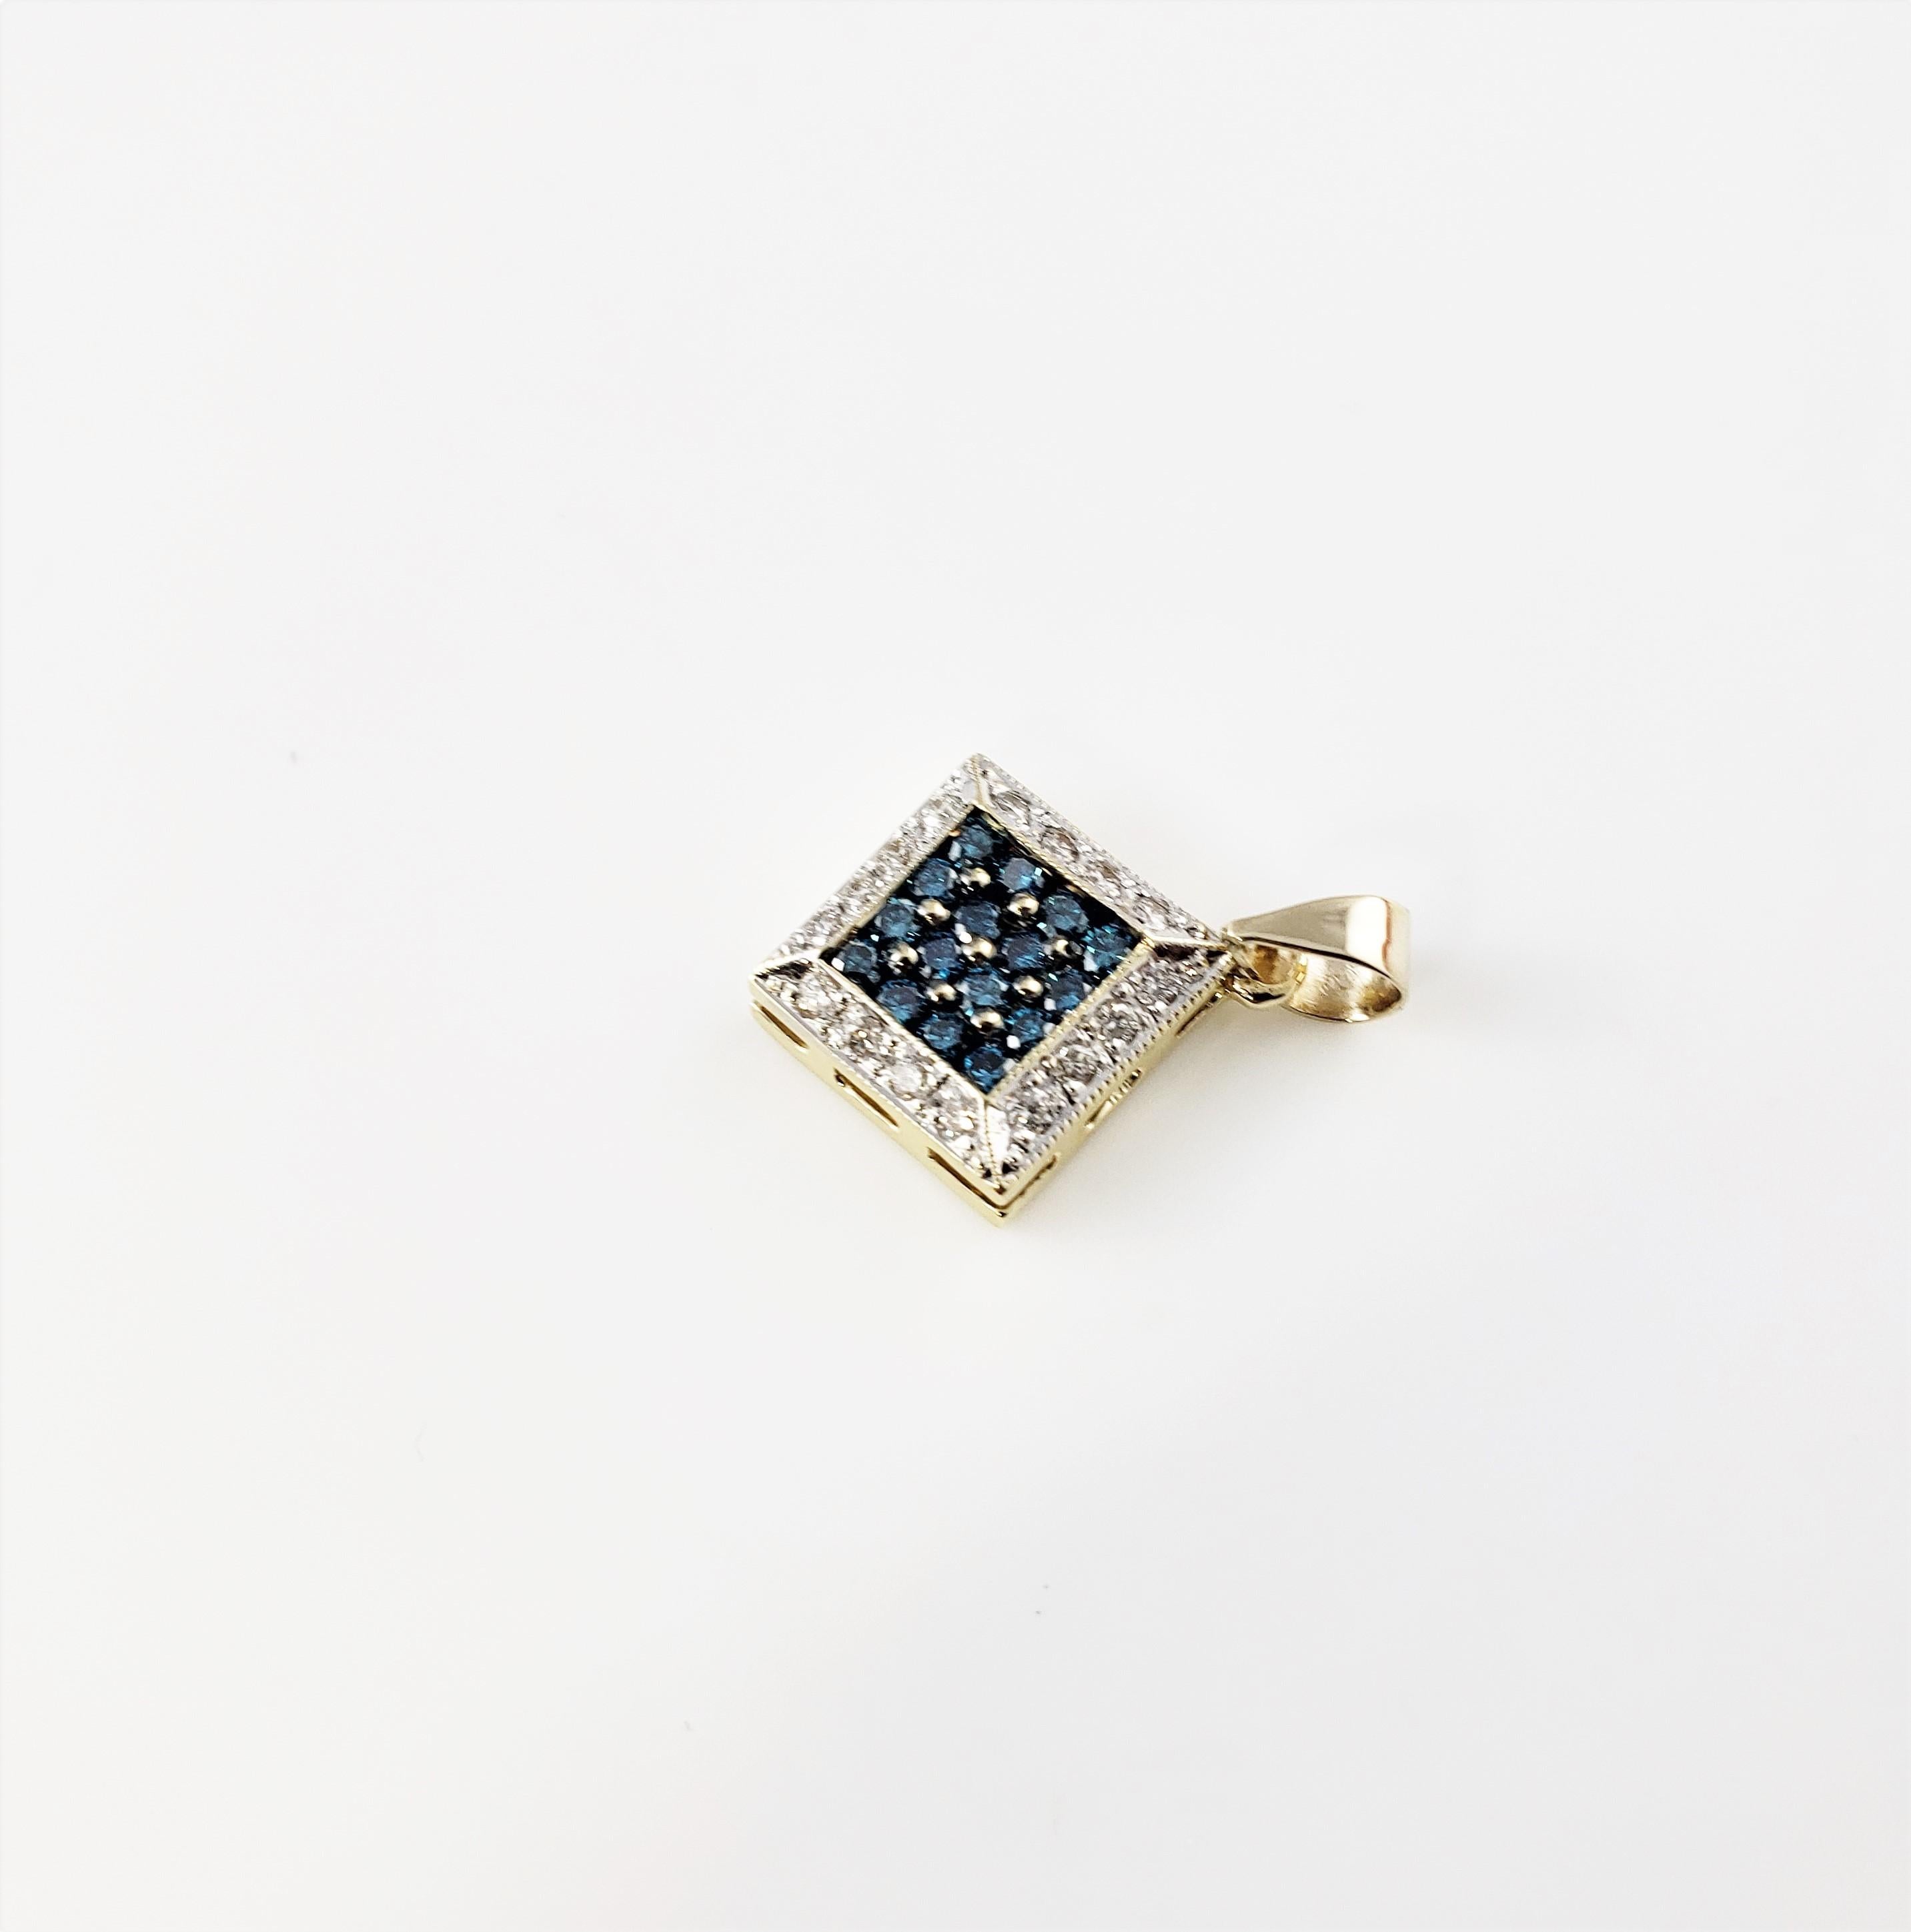 Vintage 14 Karat Yellow Gold Color-Treated Blue Diamond and White Diamond Pendant-

This lovely pendant features 16 round brilliant cut color-treated blue diamonds and 16 round brilliant cut white diamonds set in beautifully detailed 14K yellow